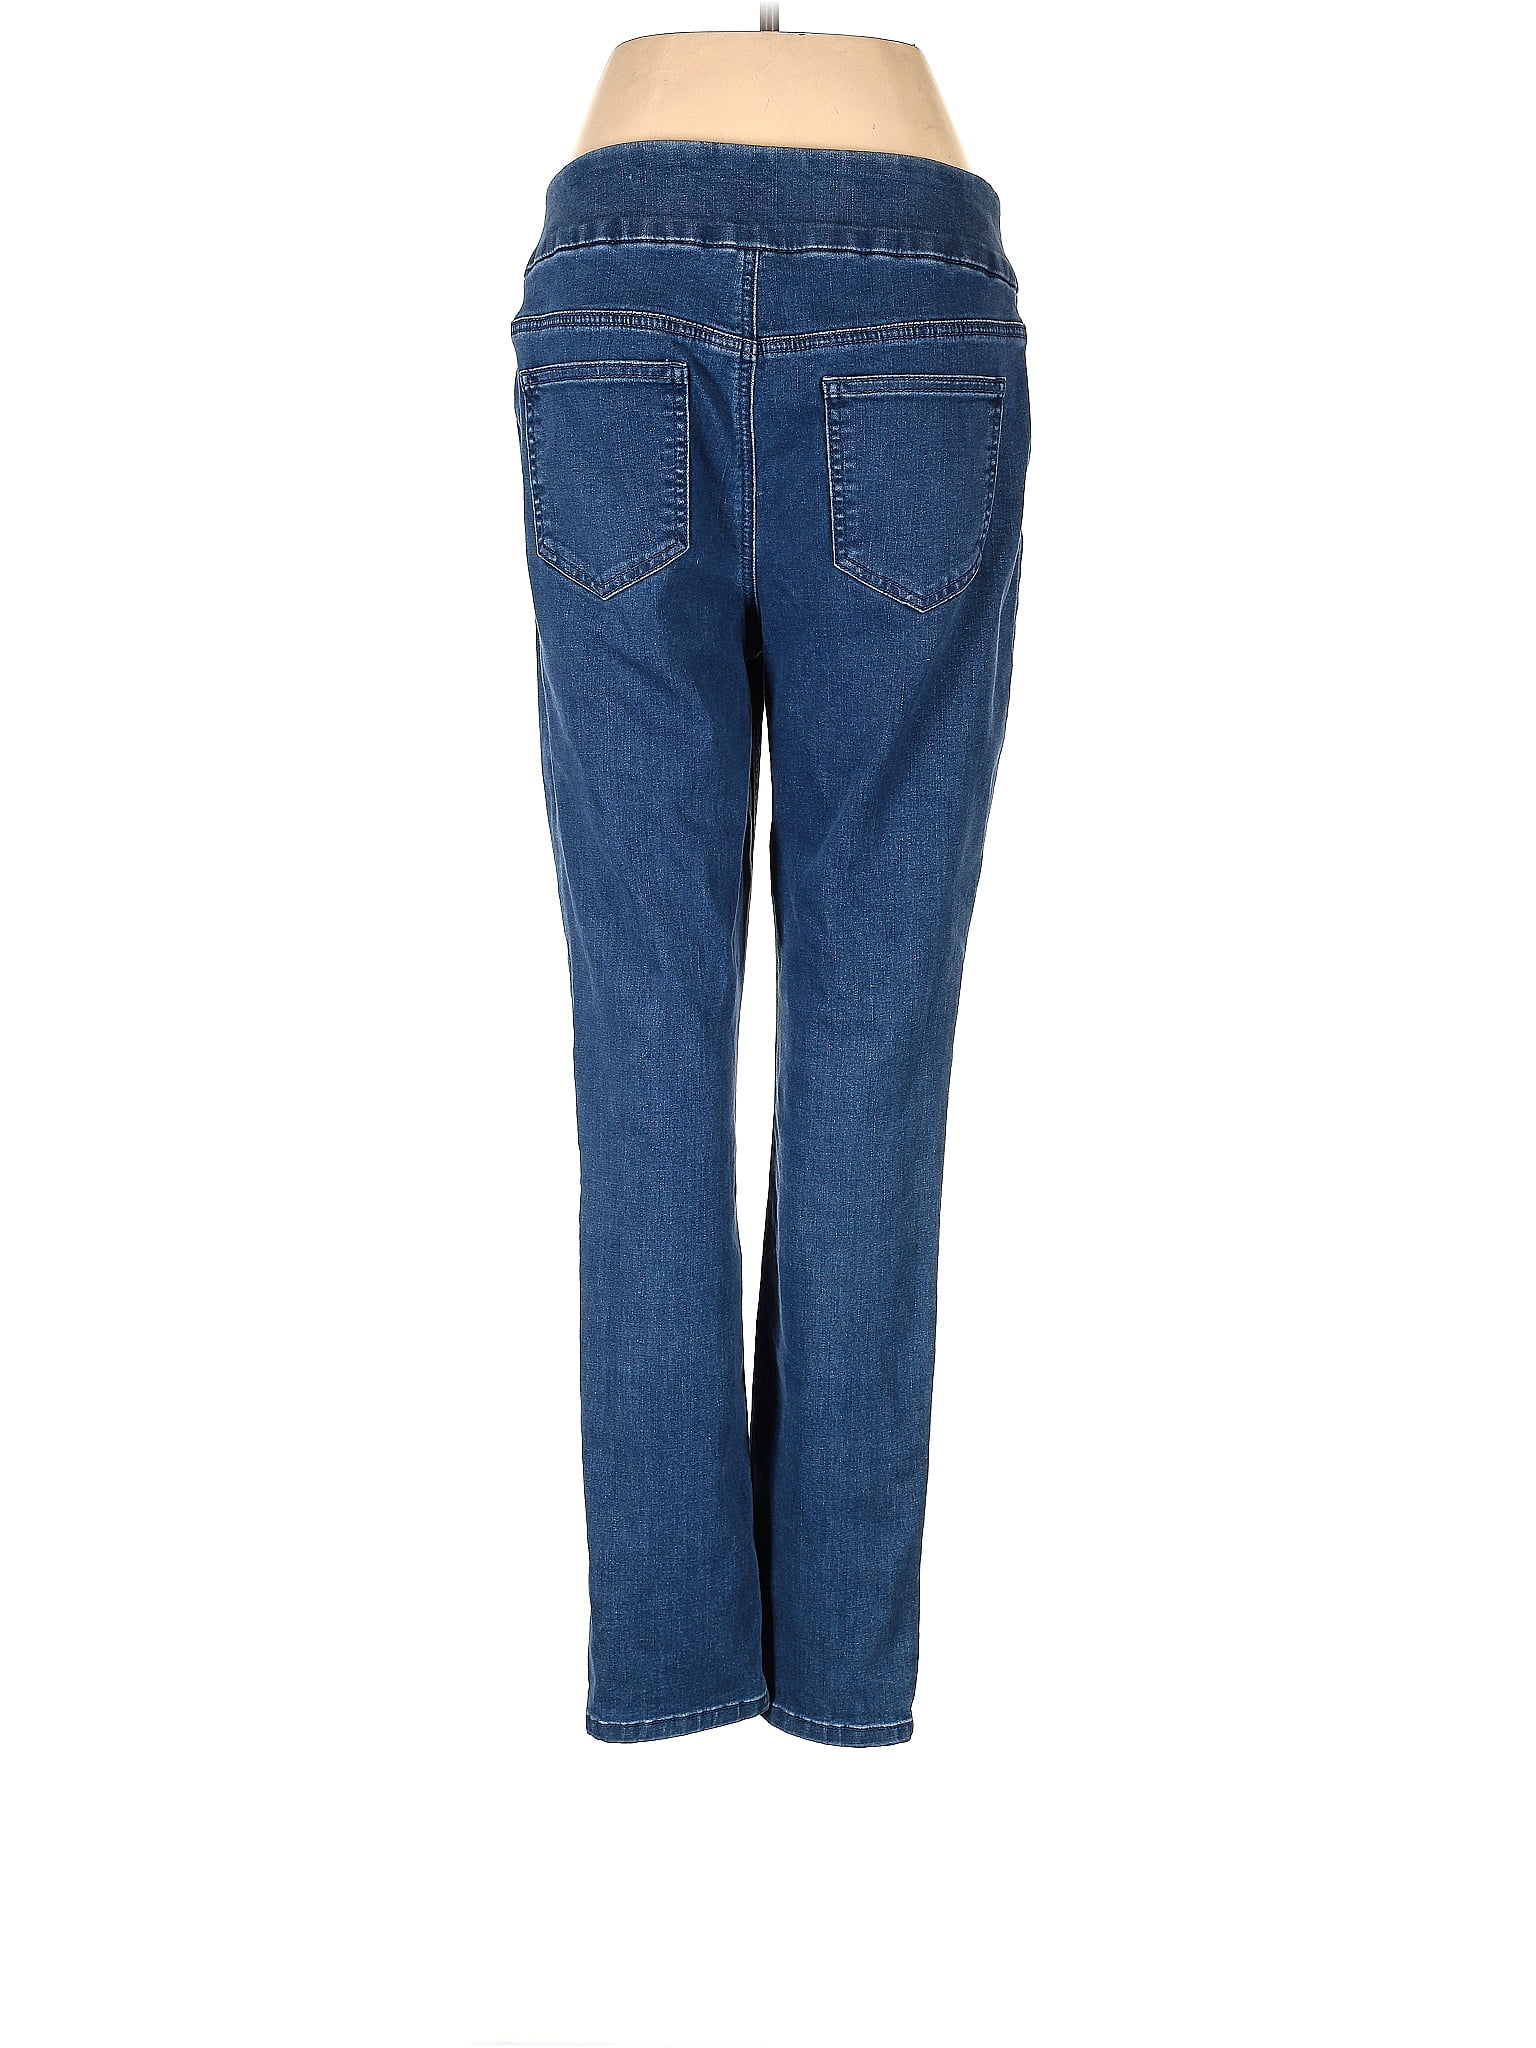 So Slimming by Chico's Solid Blue Jeans Size Lg (2) - 73% off